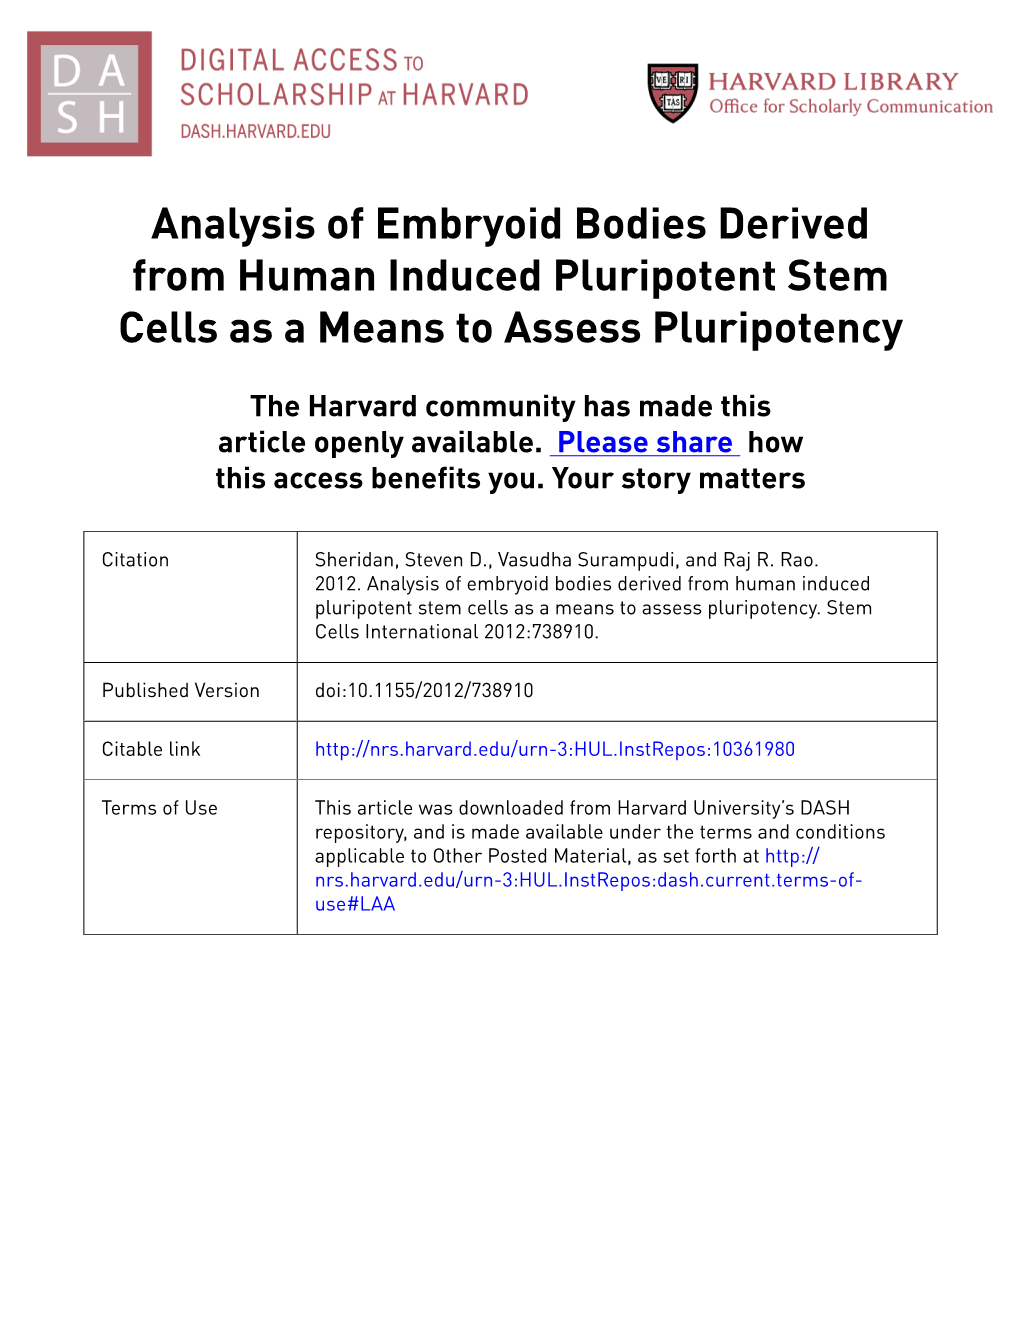 Analysis of Embryoid Bodies Derived from Human Induced Pluripotent Stem Cells As a Means to Assess Pluripotency